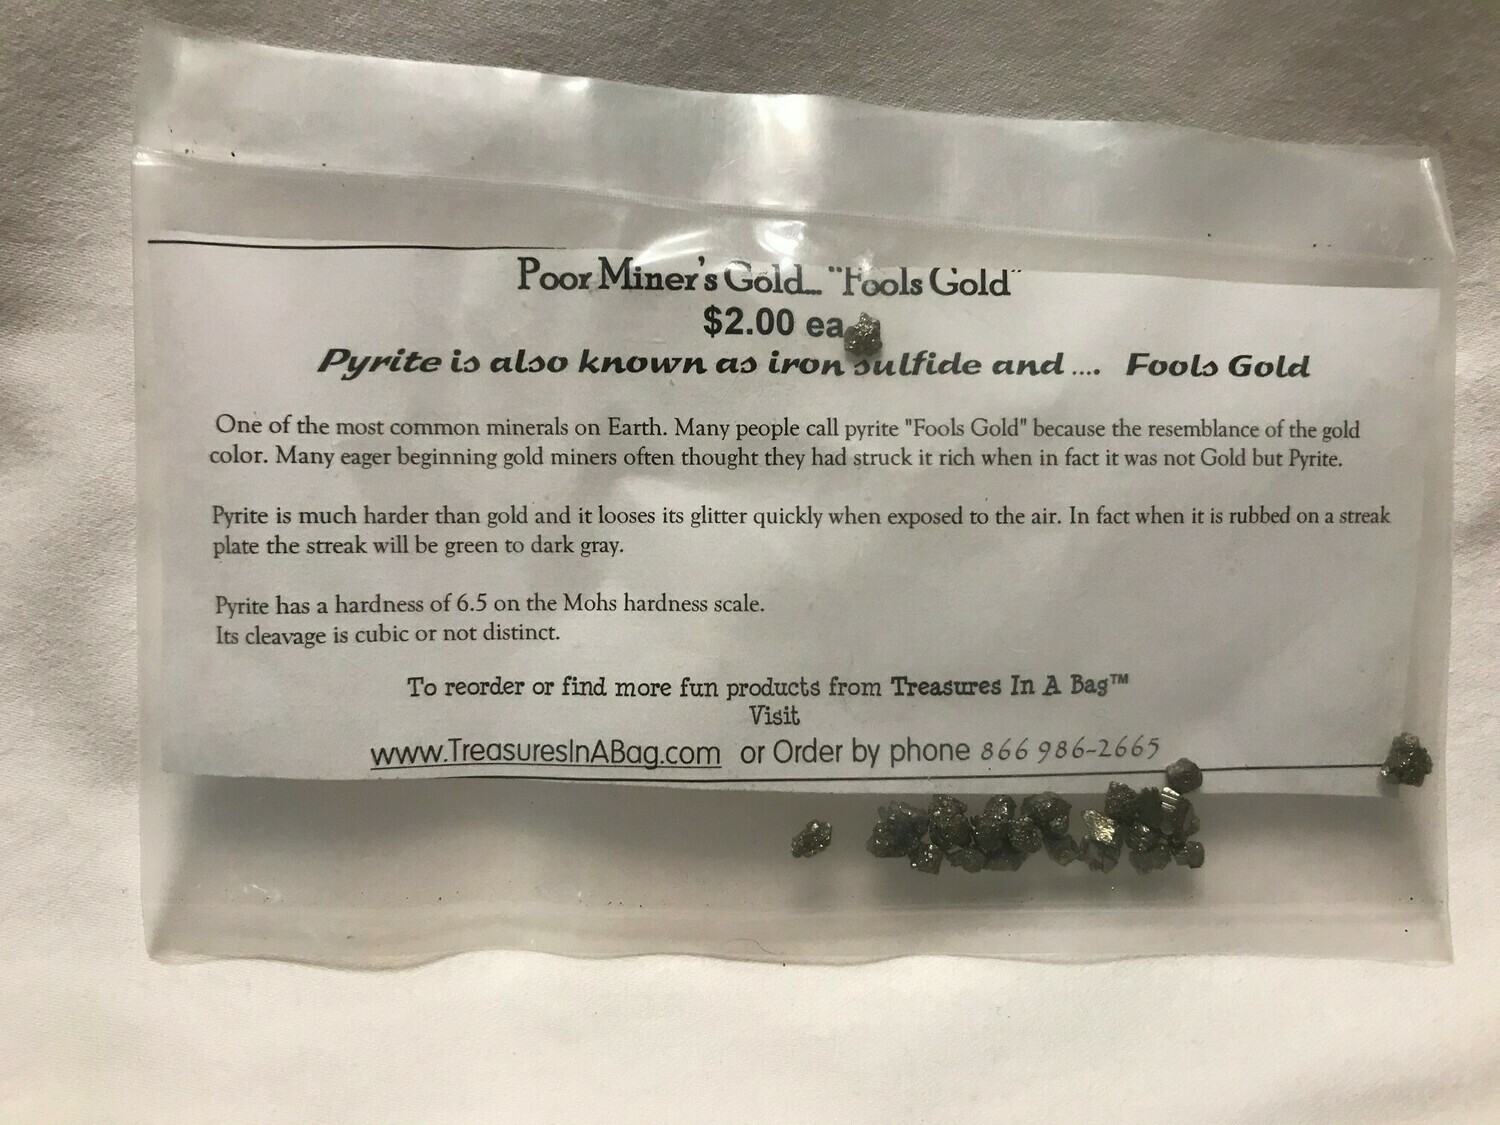 Fool's Gold - Pyrite